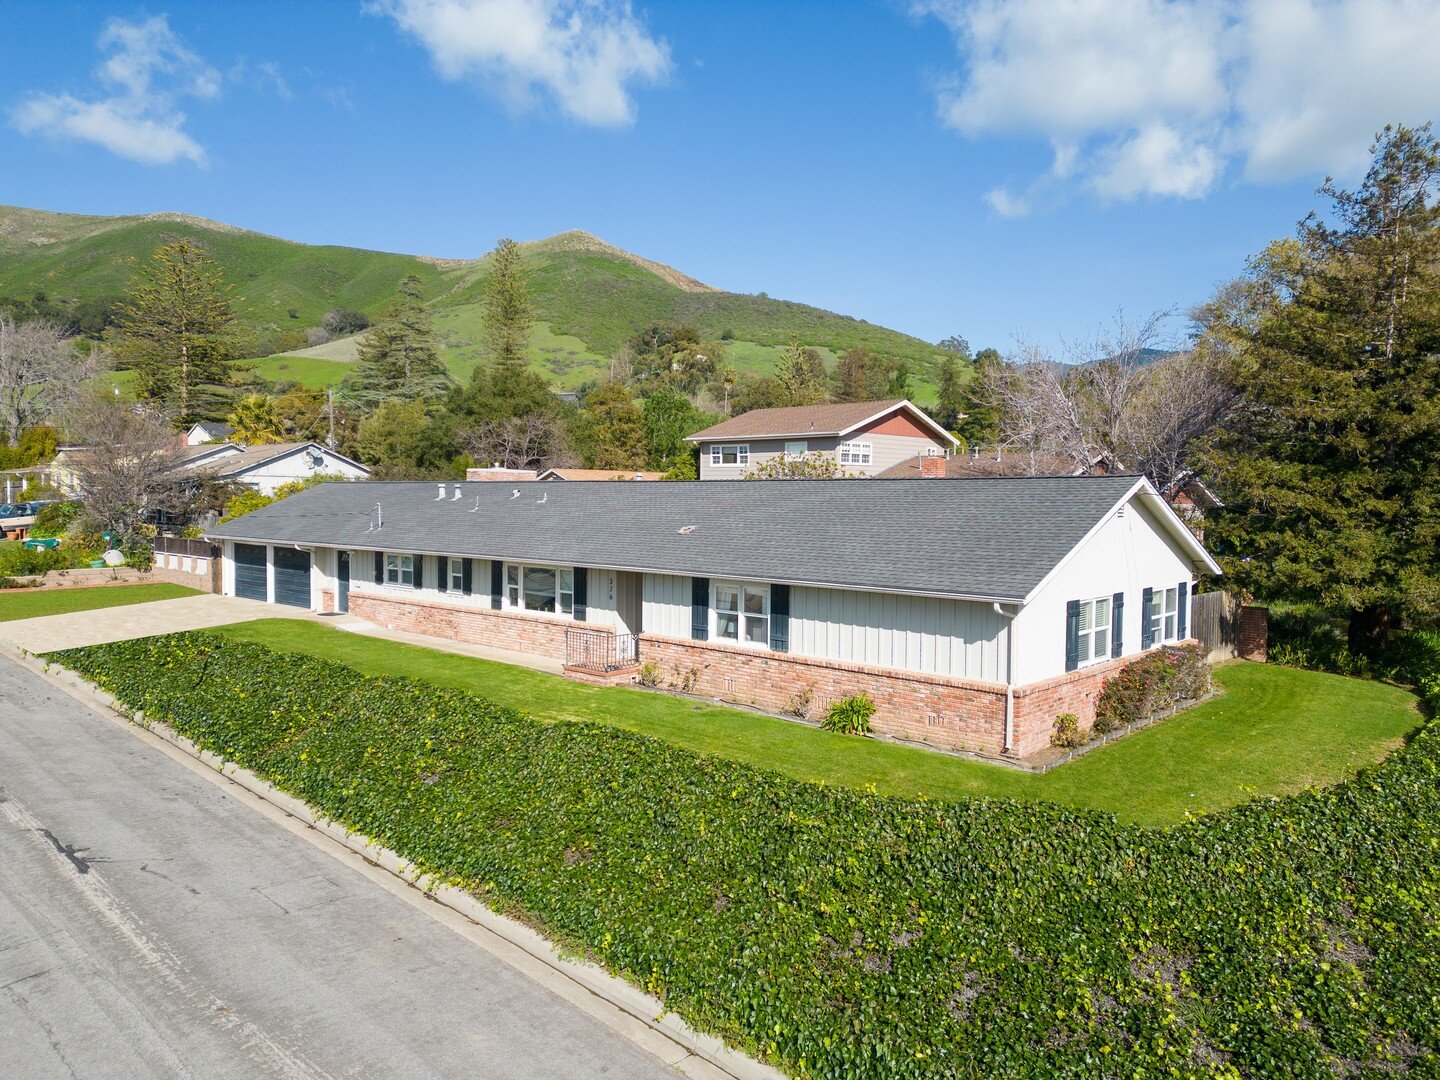 *New Listing!*

376 Graves | San Luis Obispo, CA

-2 blocks from Cal Poly Campus on a large corner lot.

-4 bedrooms, 2 baths and ~2001 sq. ft. of living space.

-Updated with central A/C just a year ago, wood and travertine flooring, crown molding p